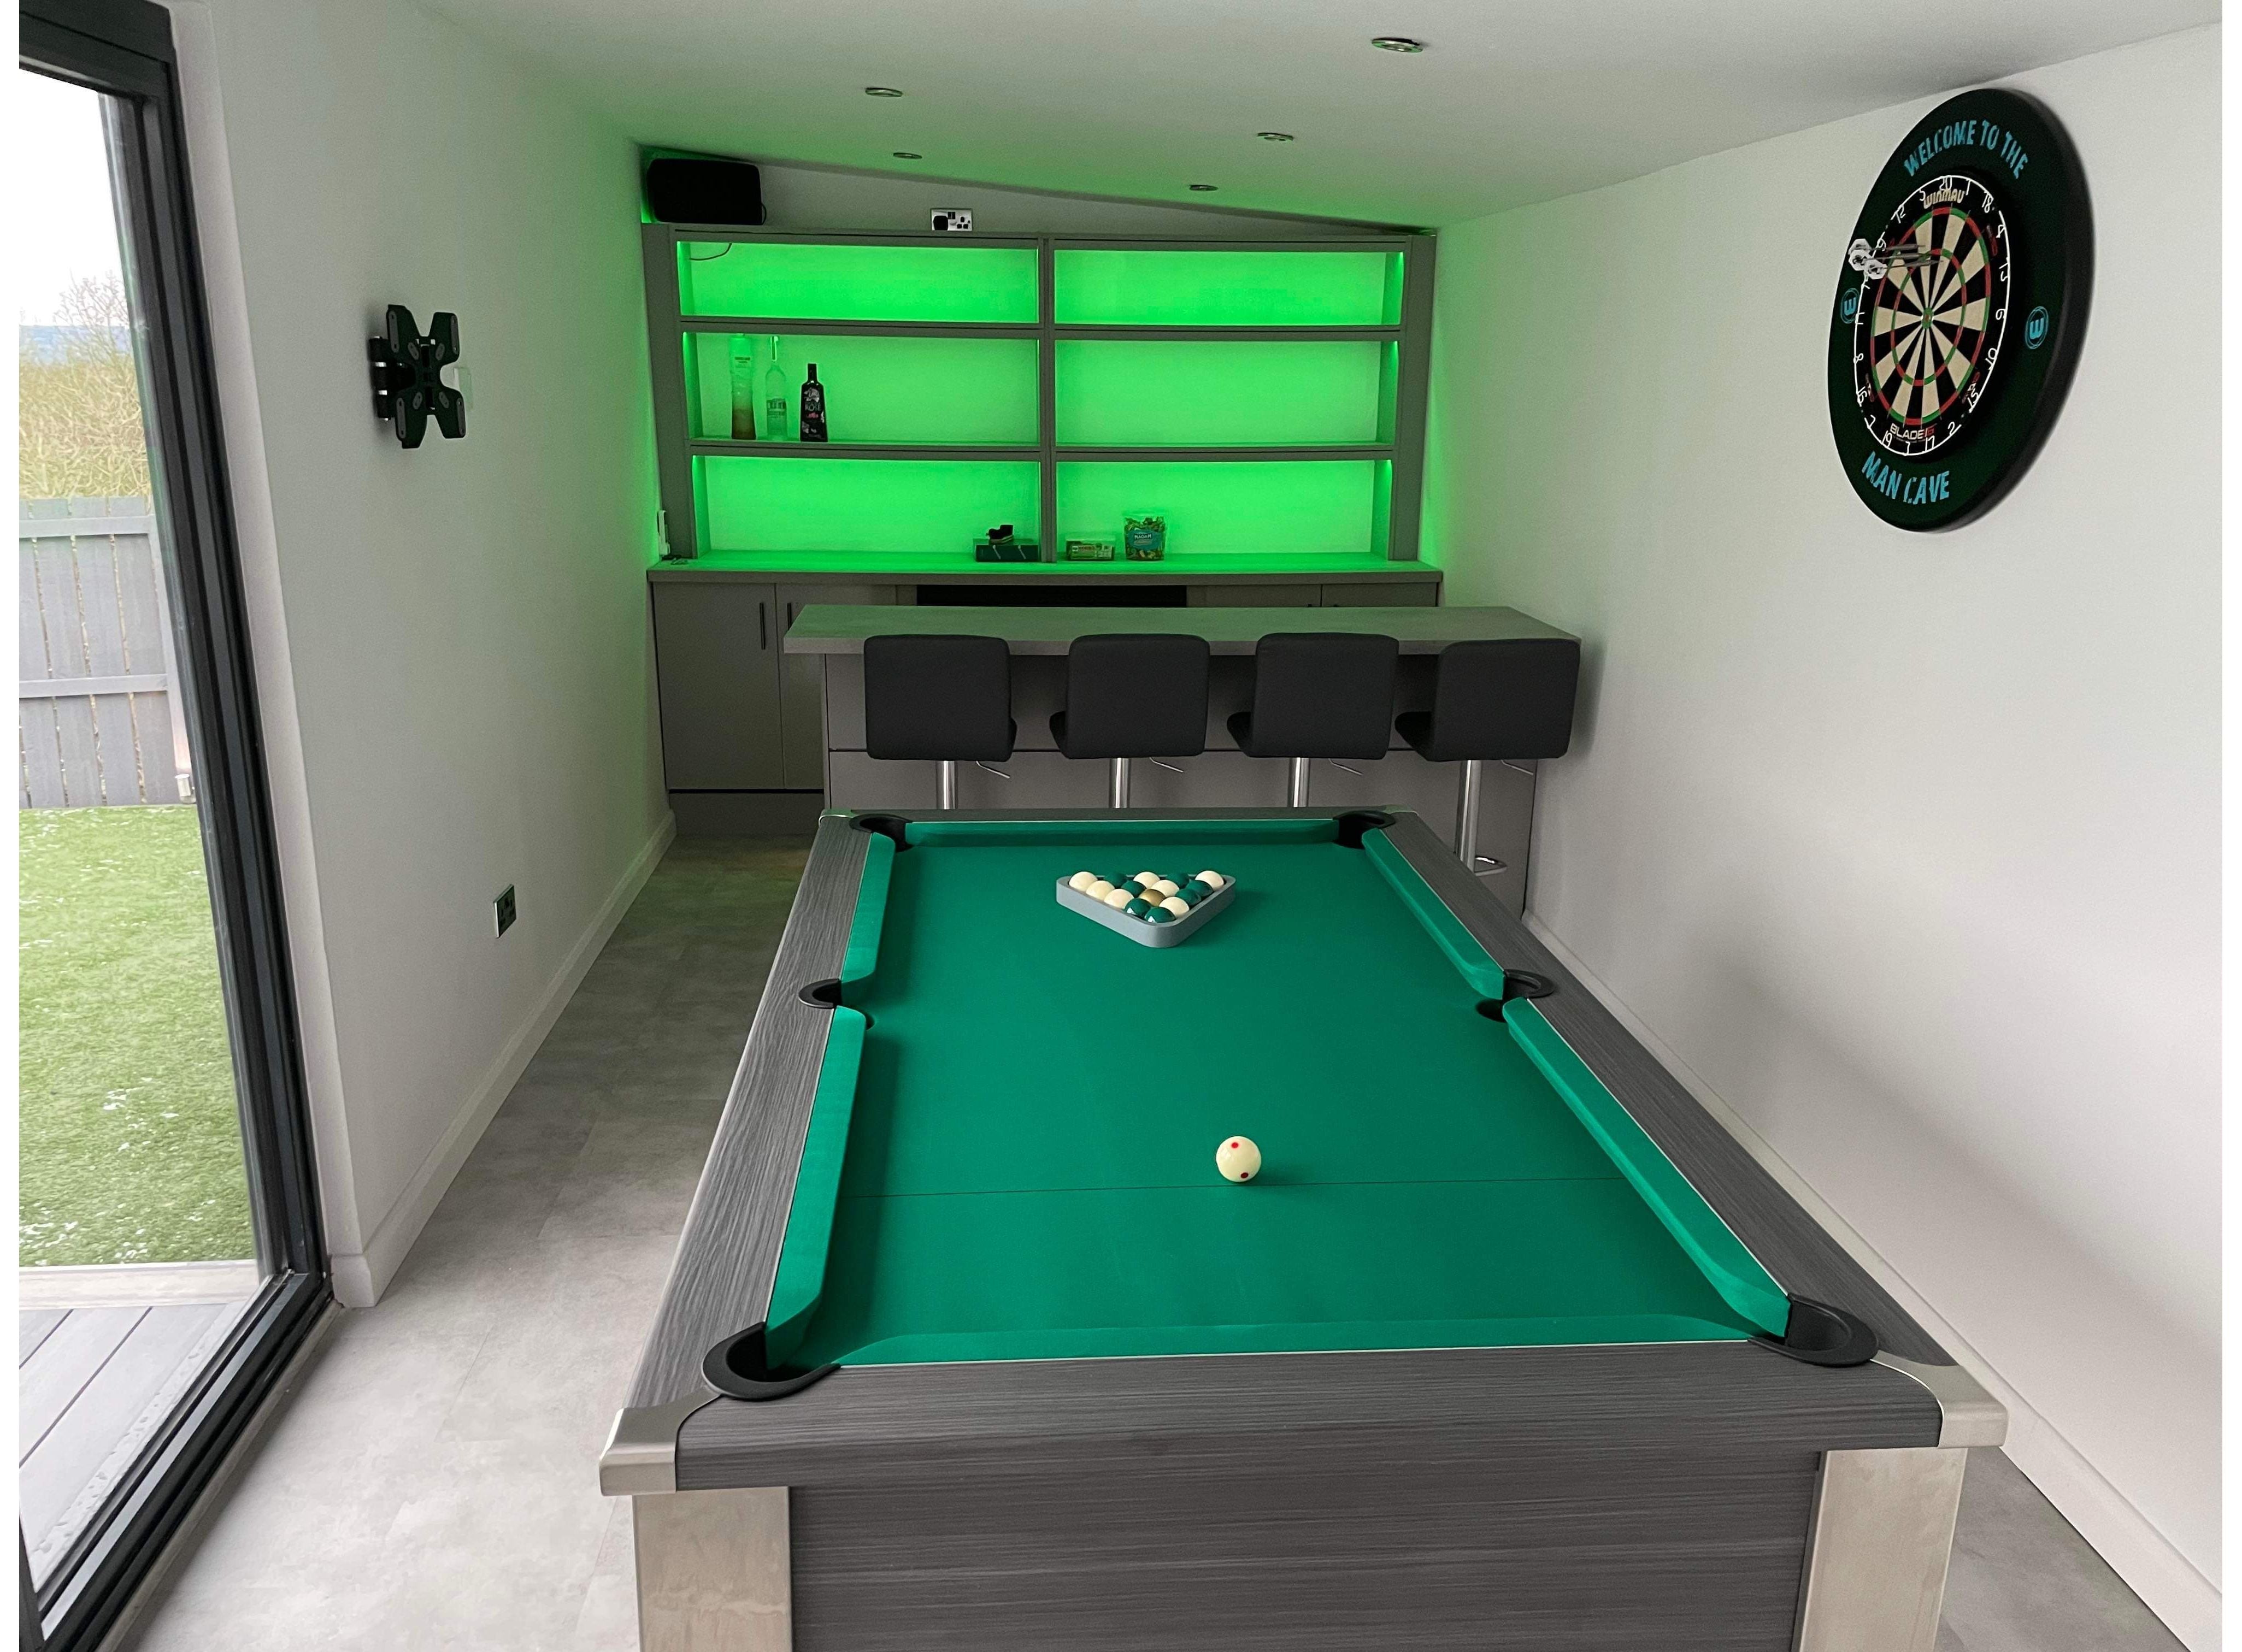 FMF Spirit Tournament Slate Bed Pool Table | 6ft & 7ft Sizes - Nuovo Luxury